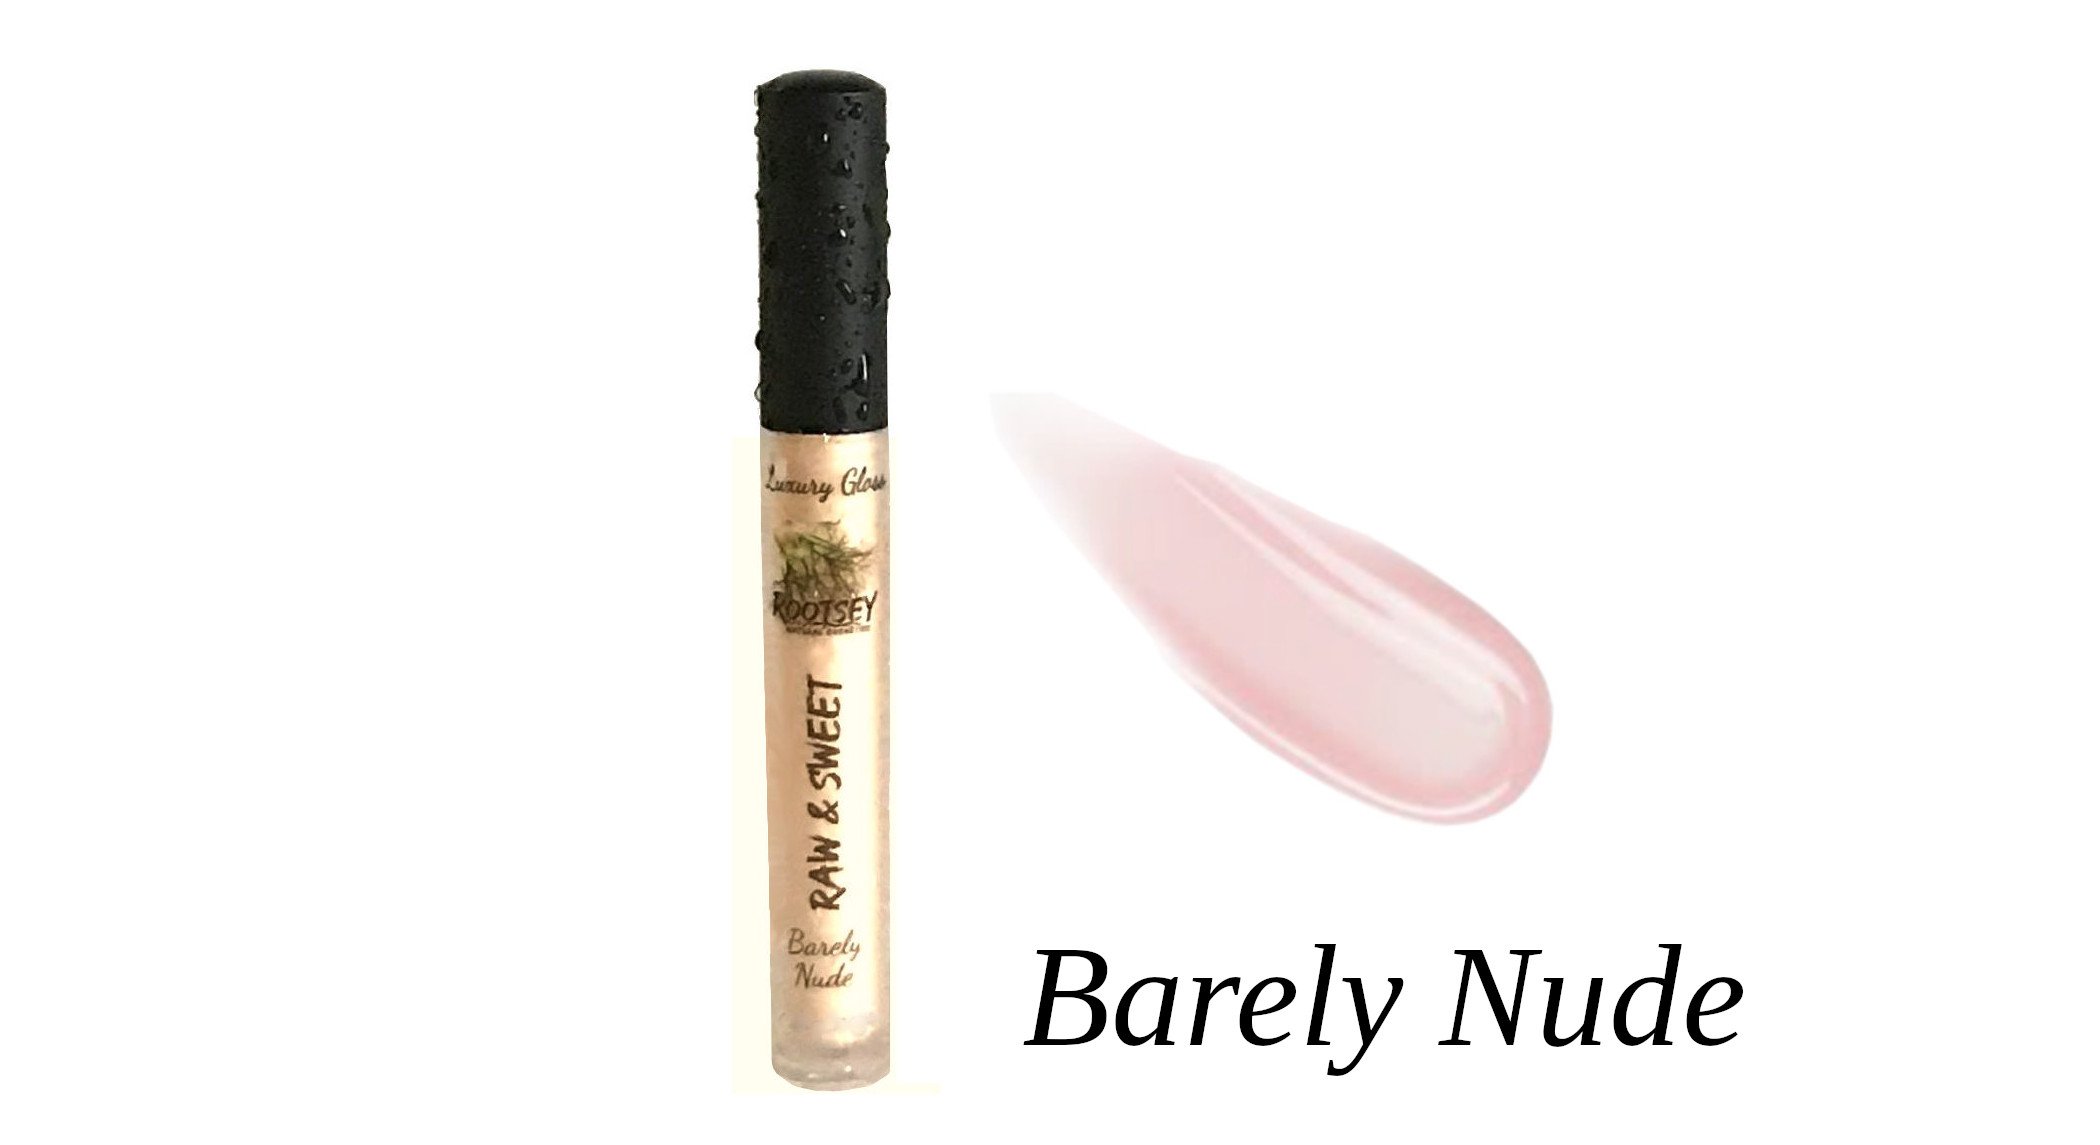 Barely Nude 100% All Natural Luxury Gloss.jpg